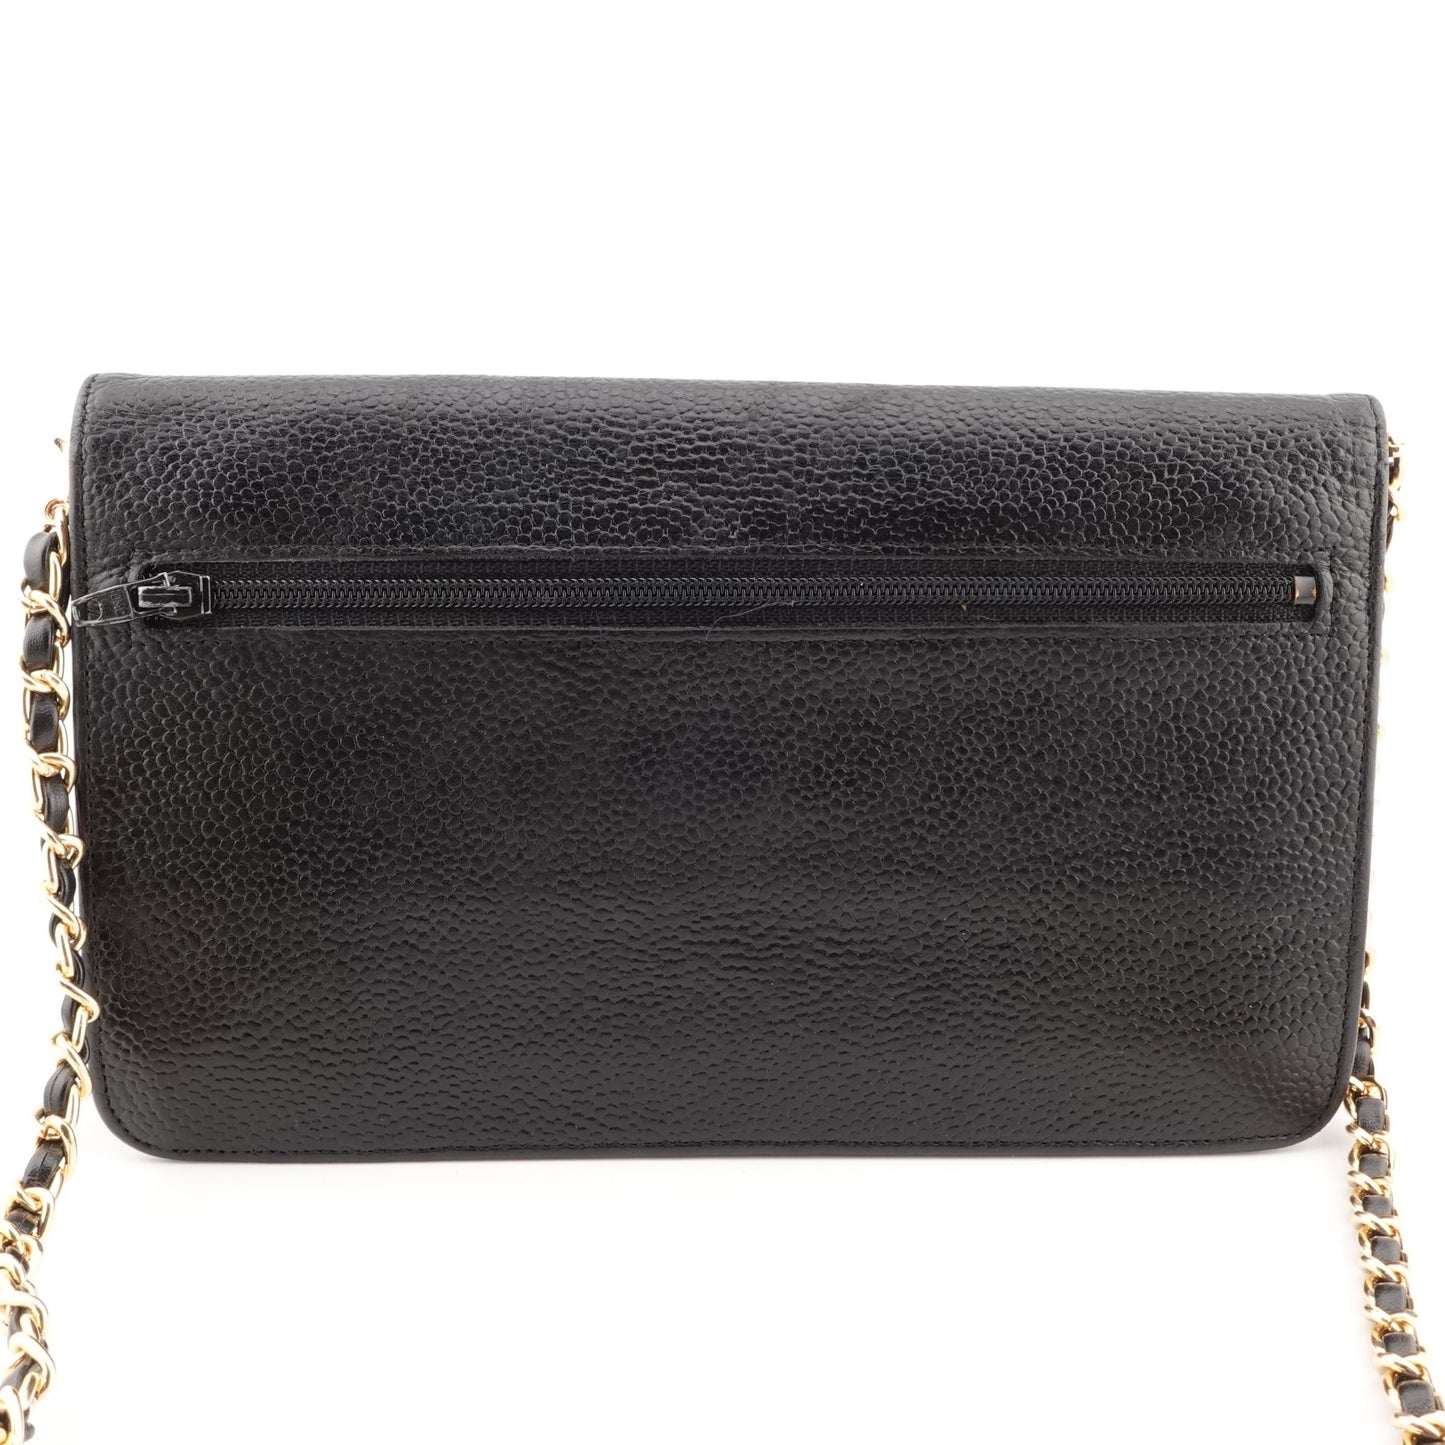 CHANEL Caviar Leather Timeless Clutch on Chain - Bag Envy